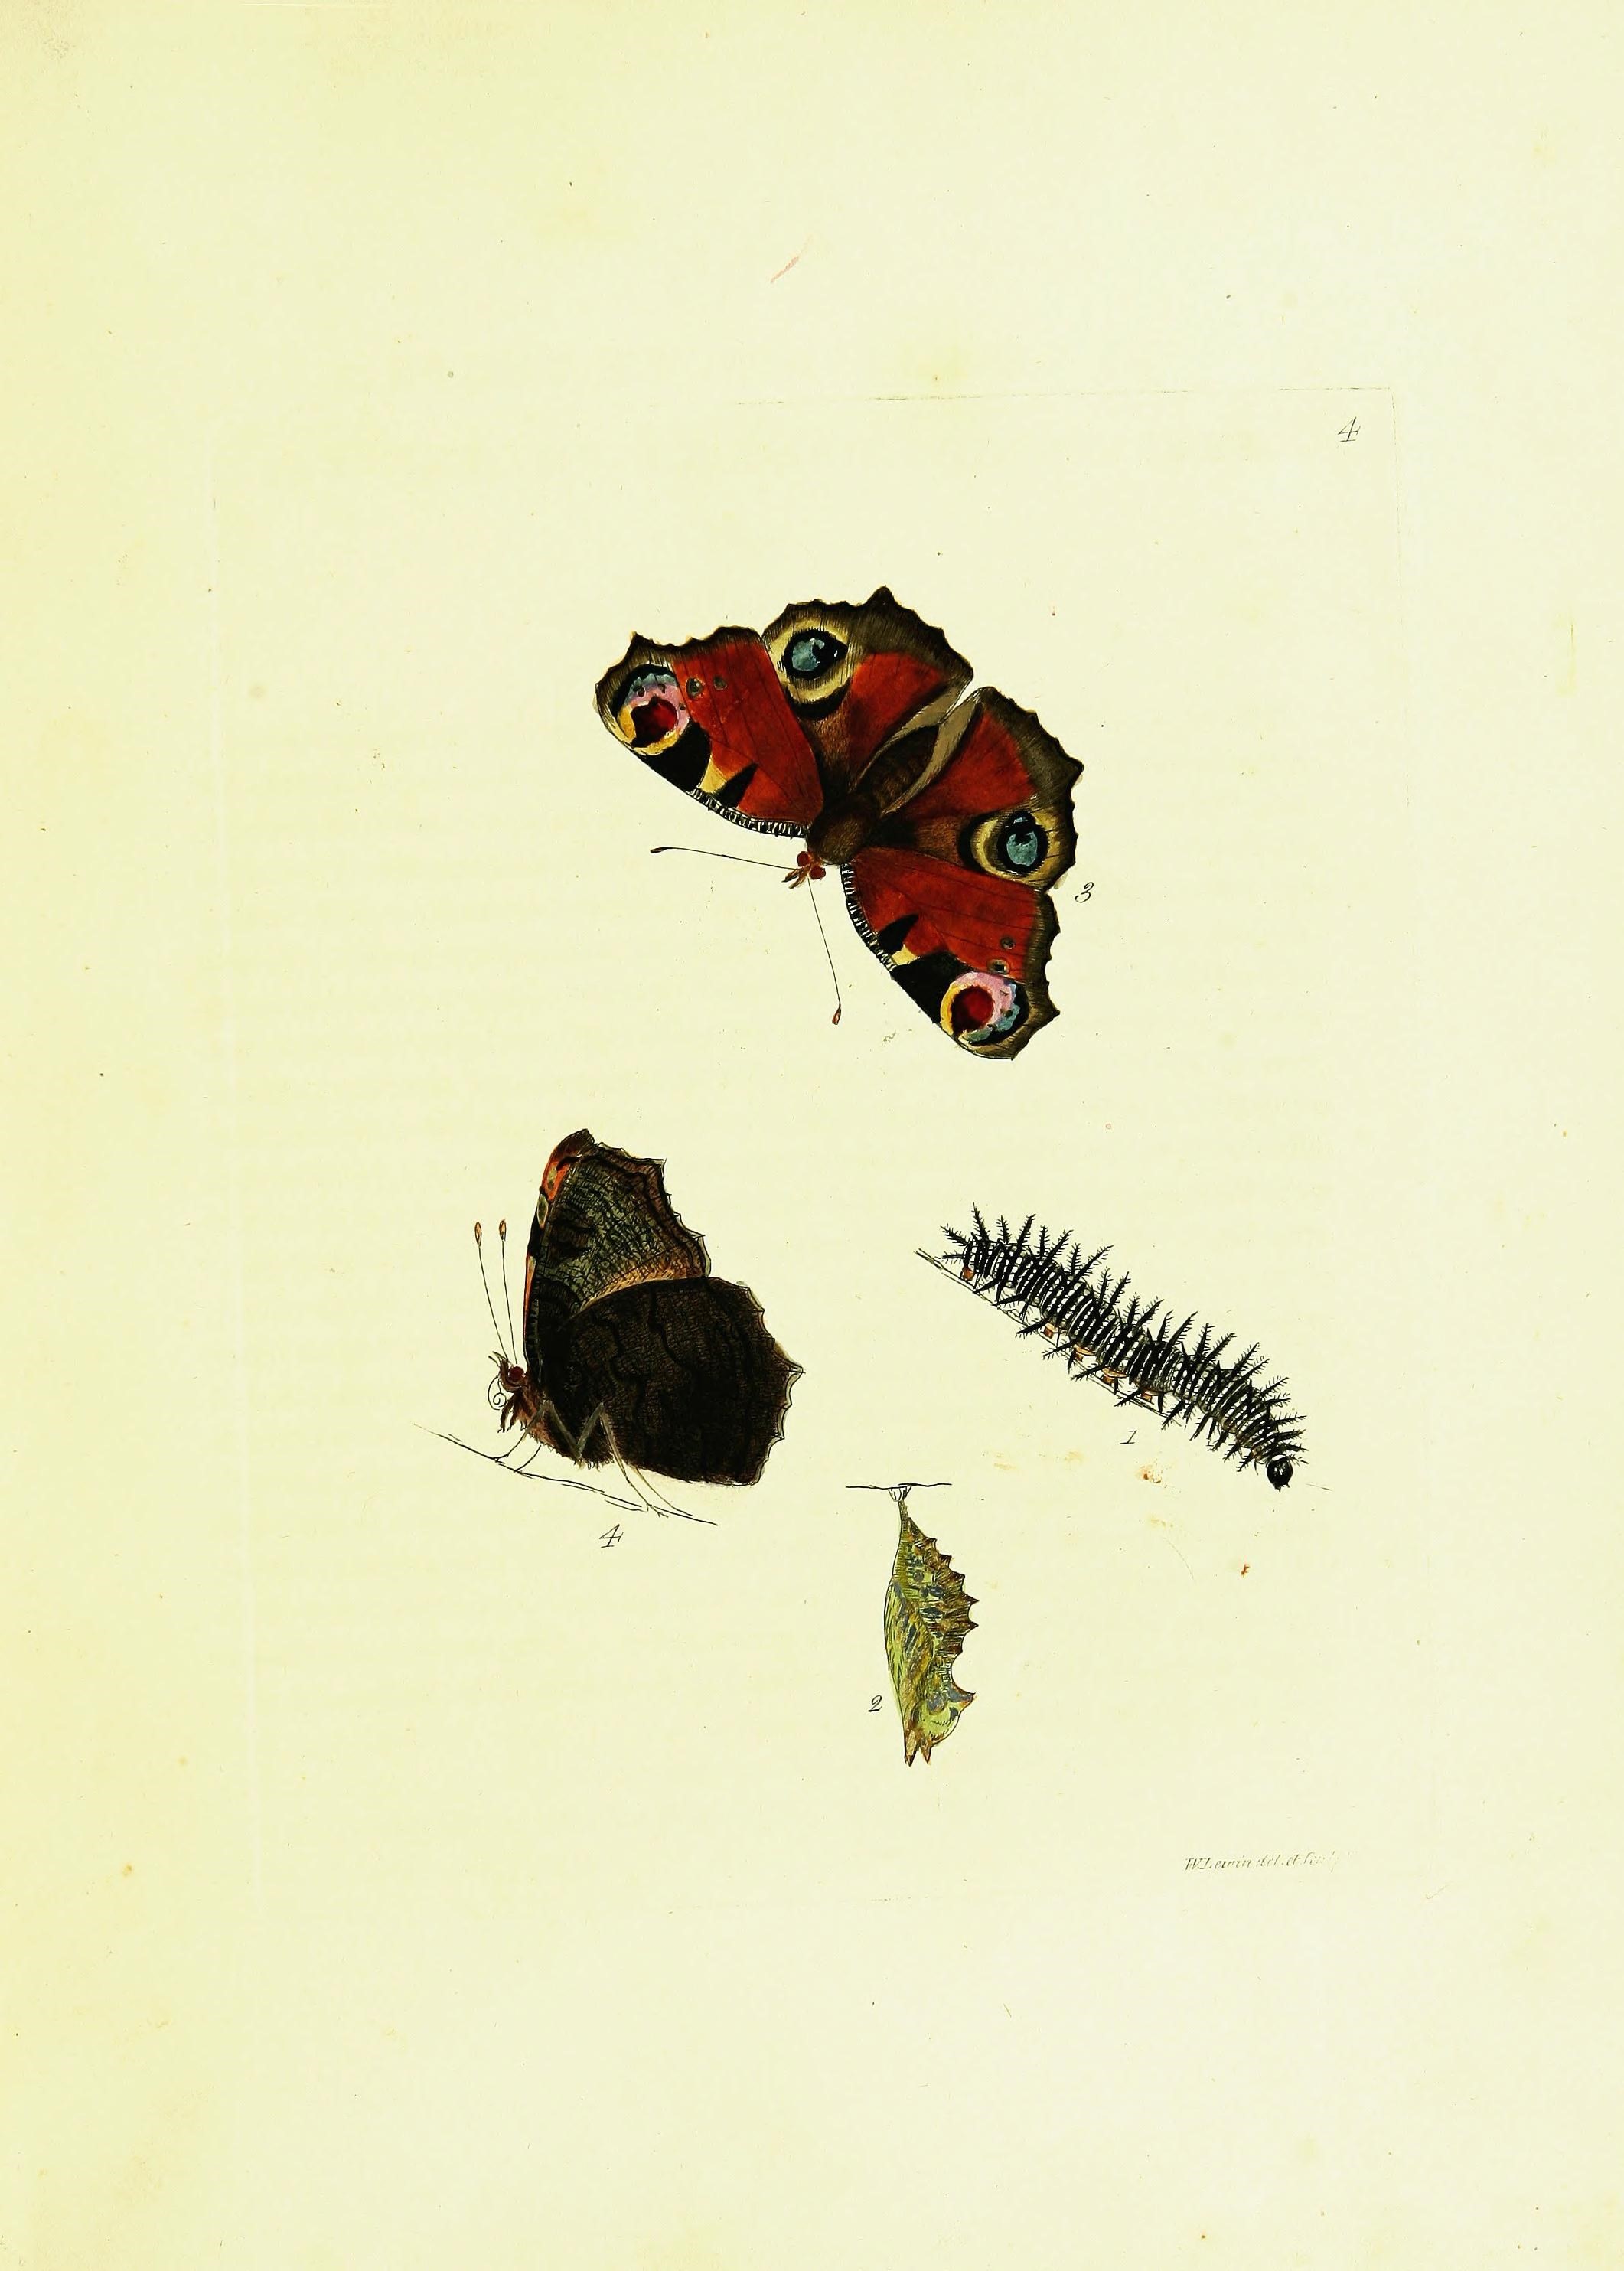 peacock butterfly caterpillar and chrysalis